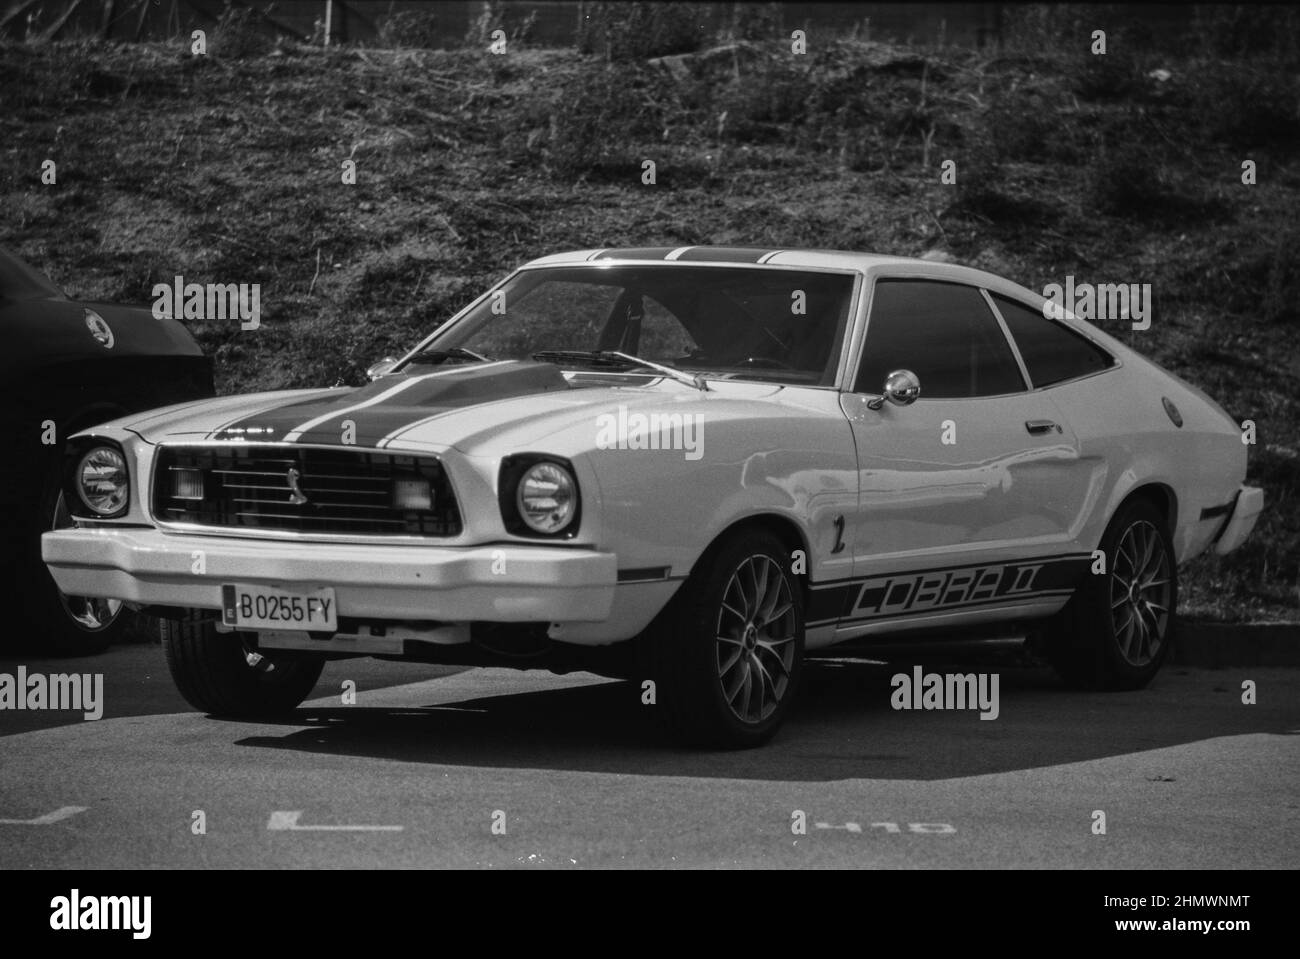 Ford mustang cobra Black and White Stock Photos & Images - Alamy